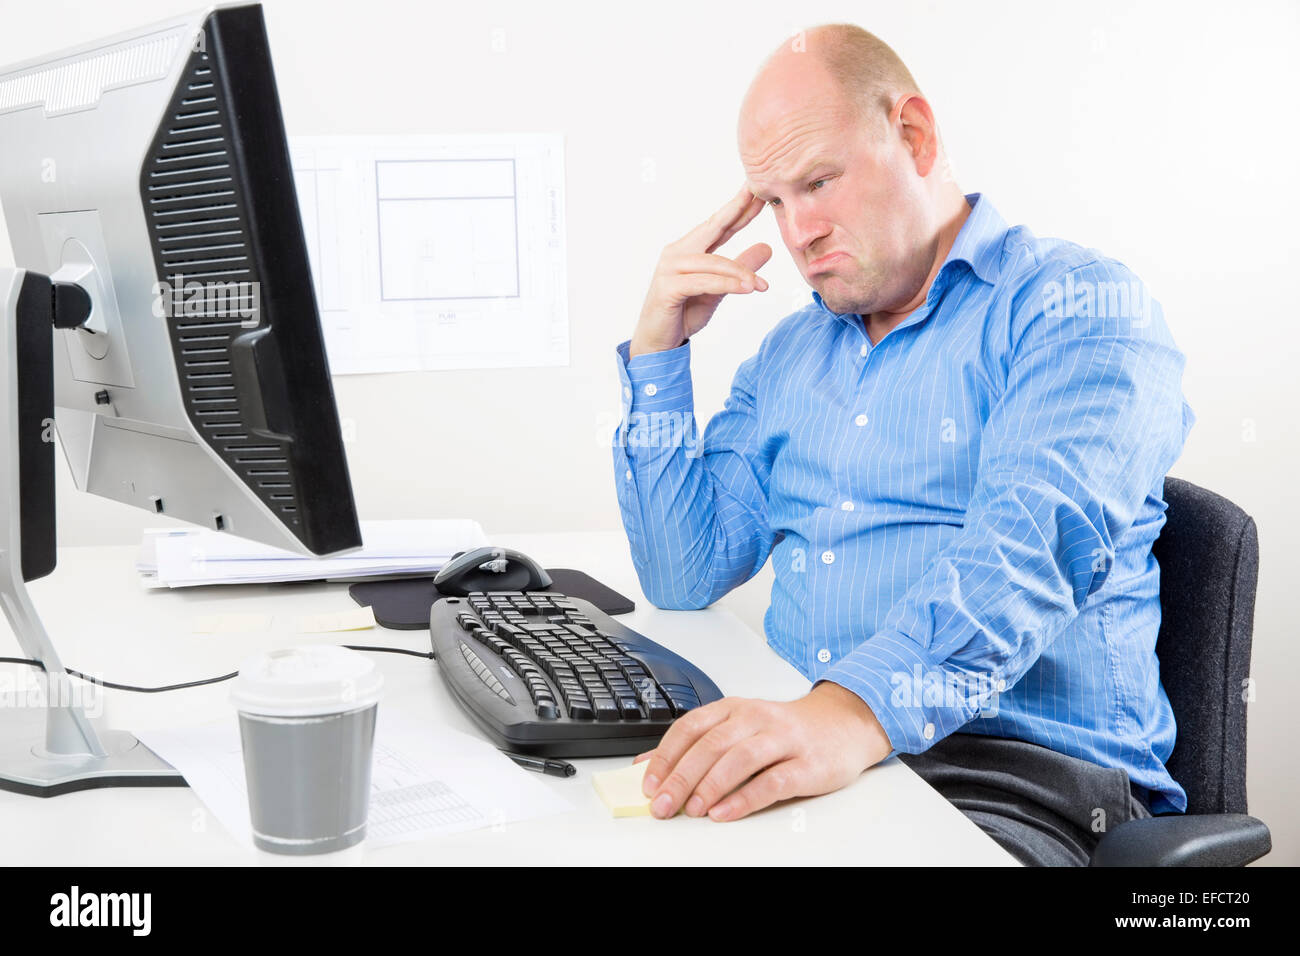 Tired and sad office worker Stock Photo